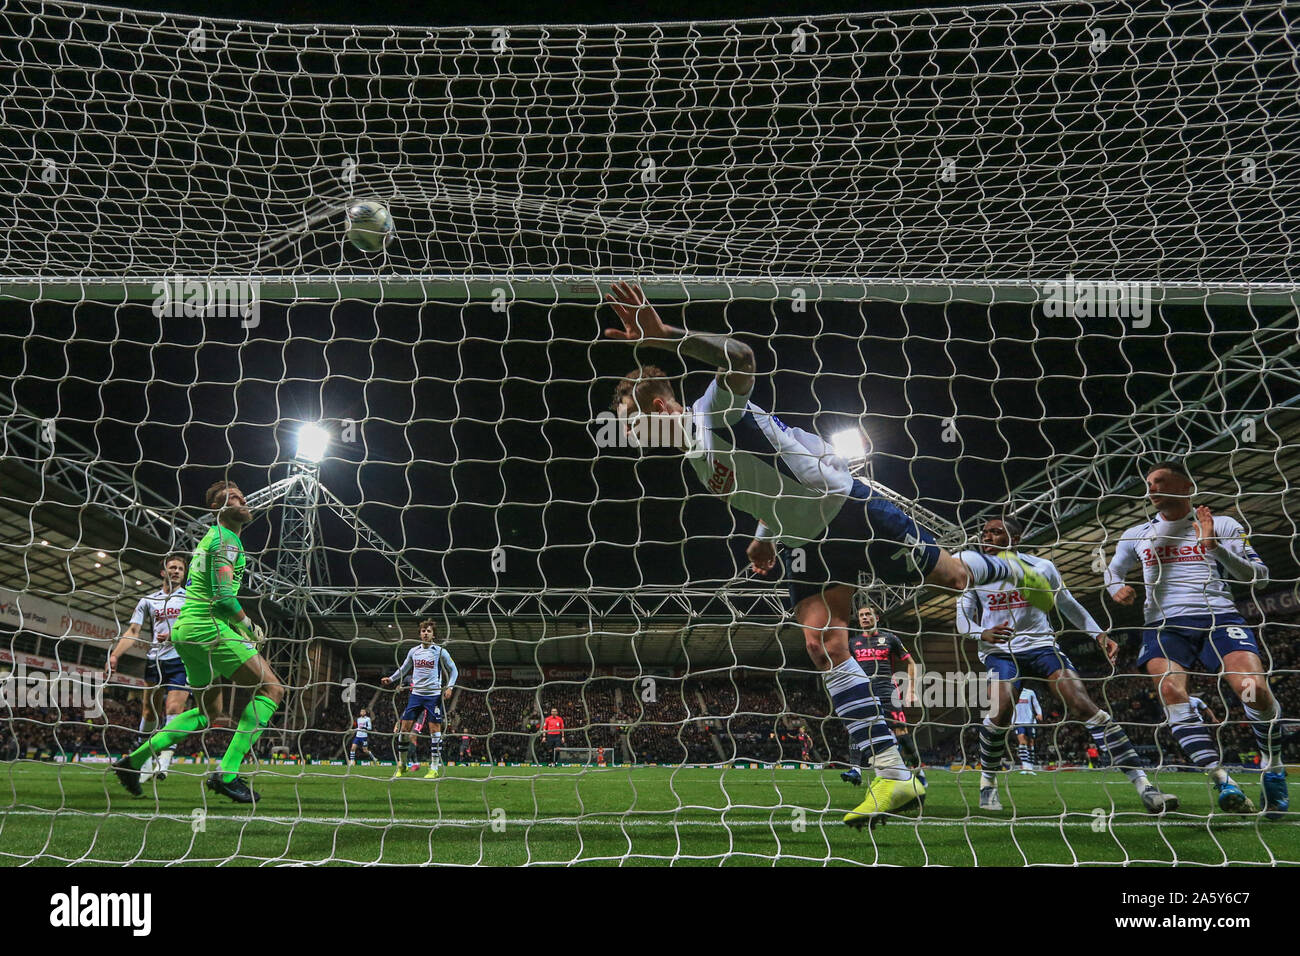 22nd October 2019, Deepdale, Preston, England; Sky Bet Championship, Preston North End v Leeds United : Patrick Bauer (21) of Preston North End heads in a own goal of Eddie Nketiah (14) of Leeds United’s s header on goal  Credit: Mark Cosgrove/News Images Stock Photo